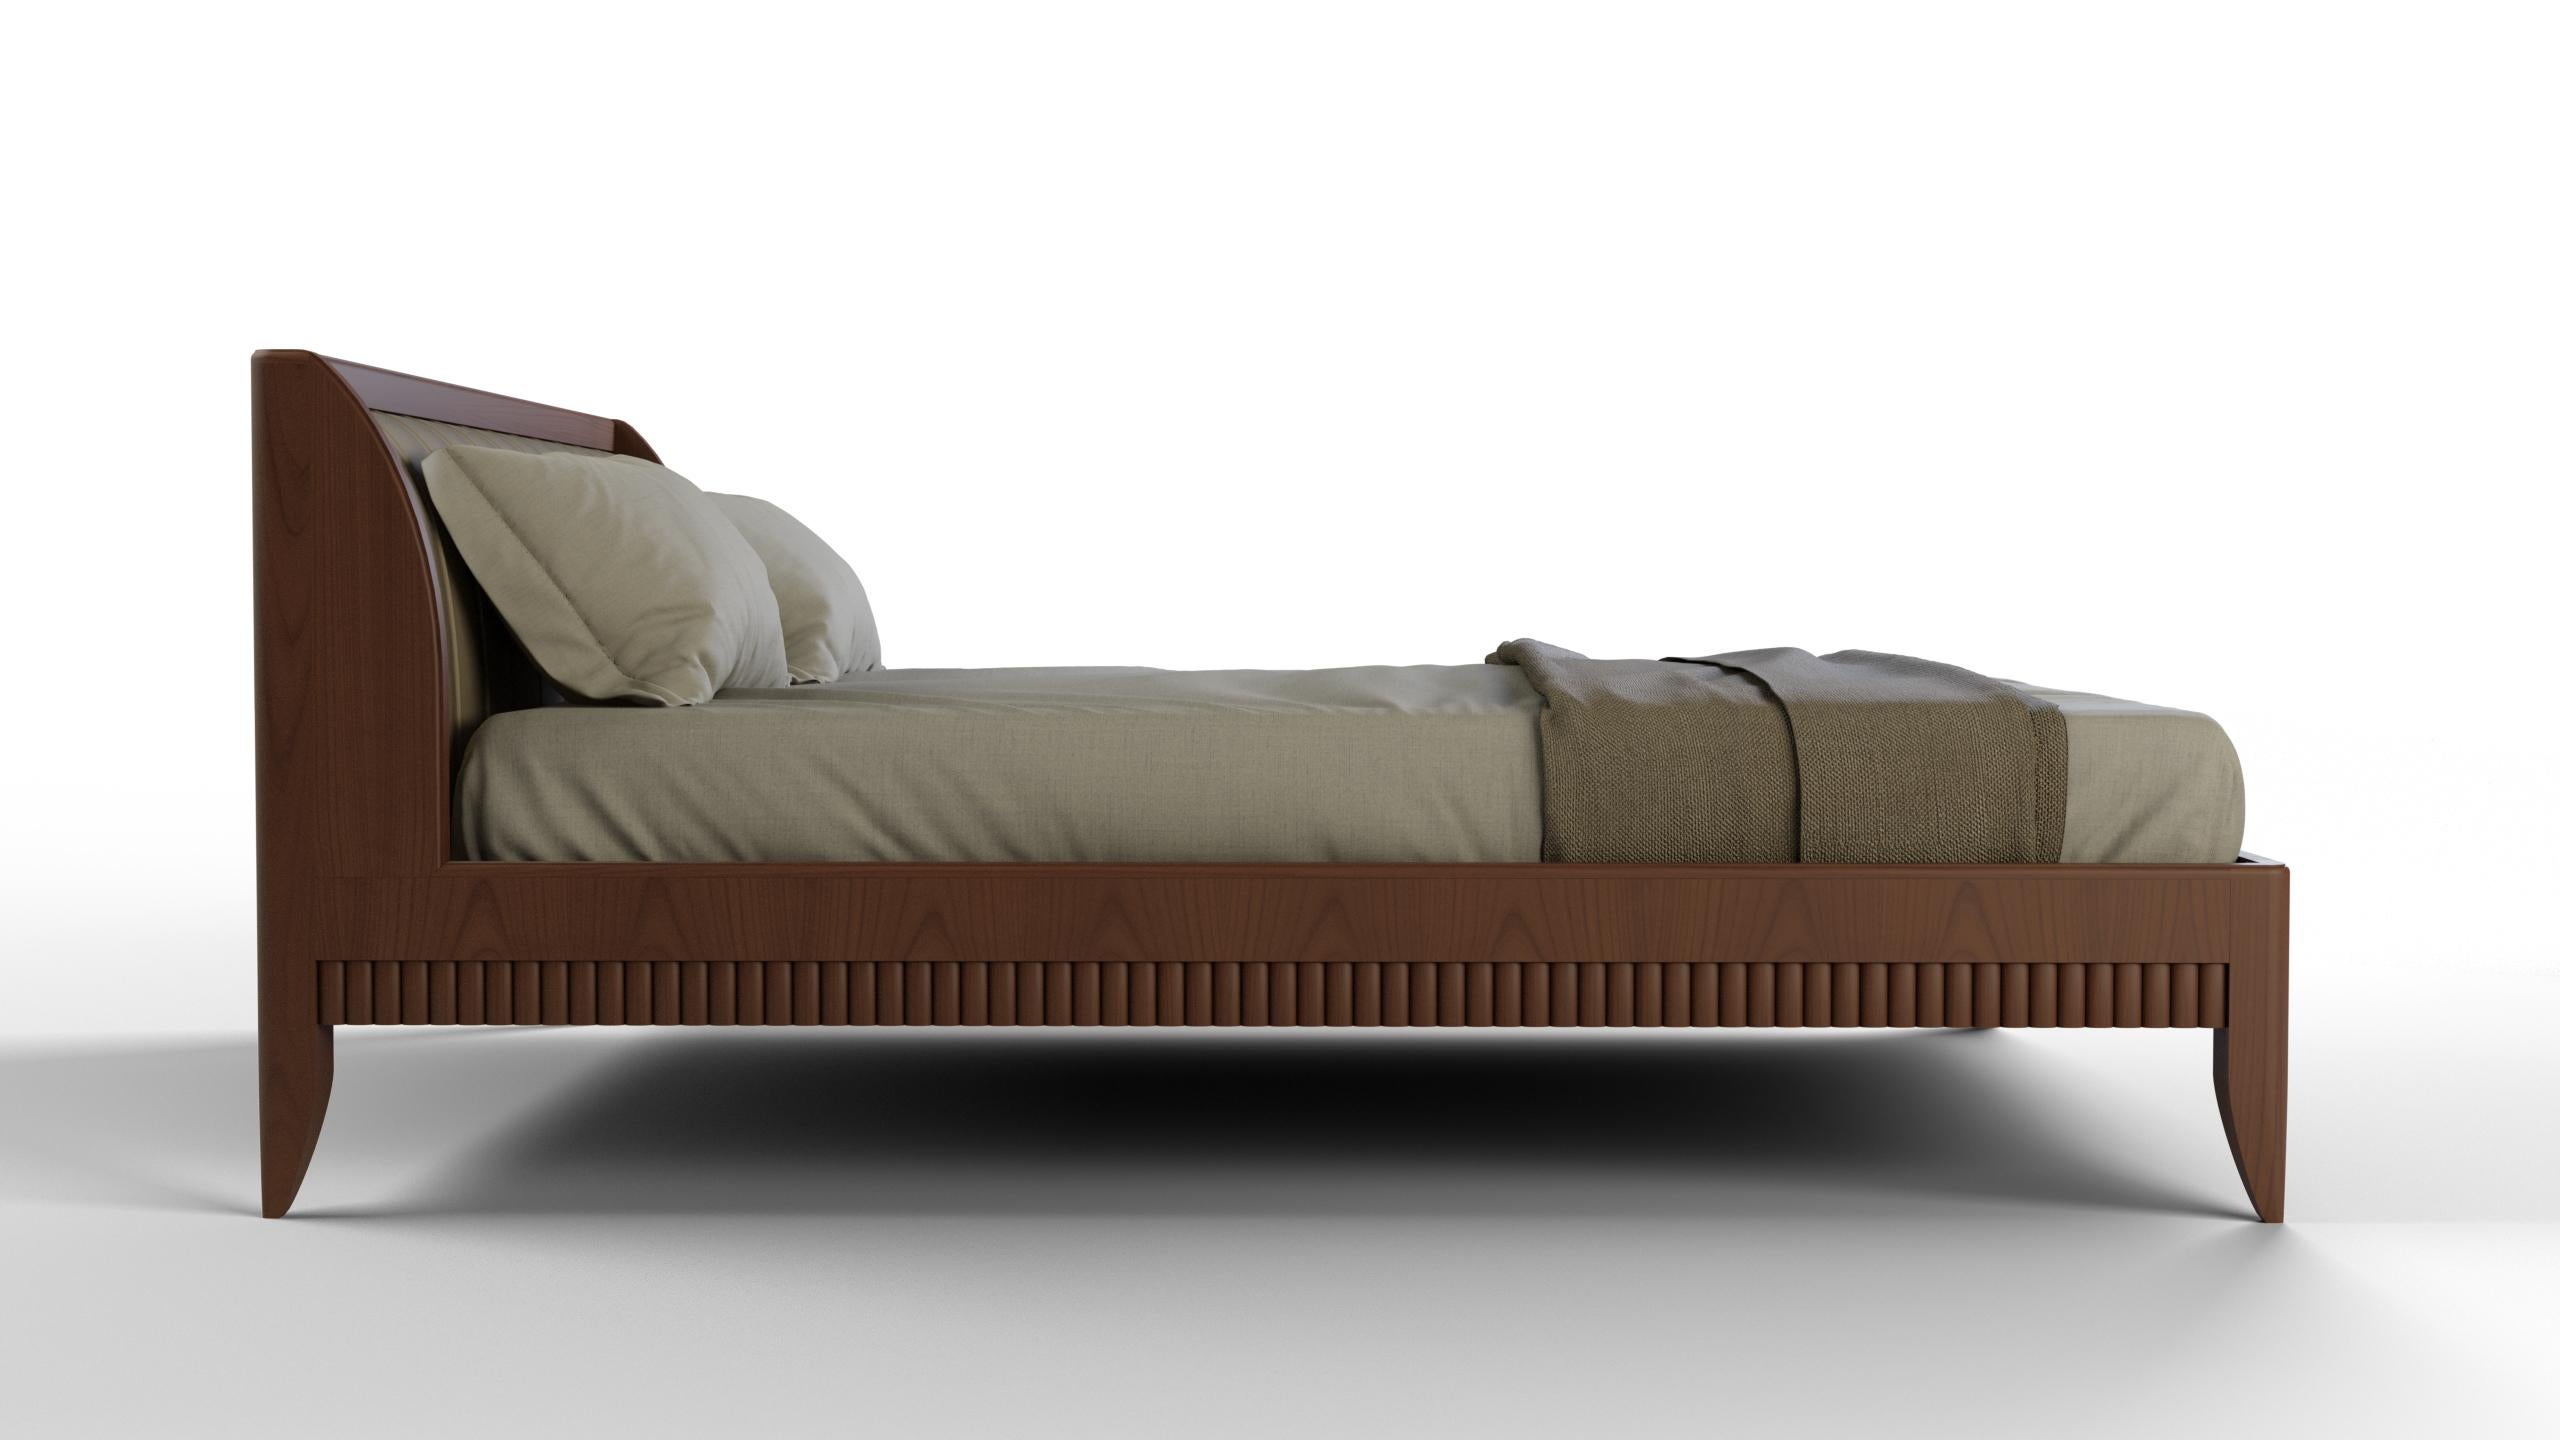 Contemporary Rulman by Morelato, Bed Made of Cherry Wood with Upholstered Headboard